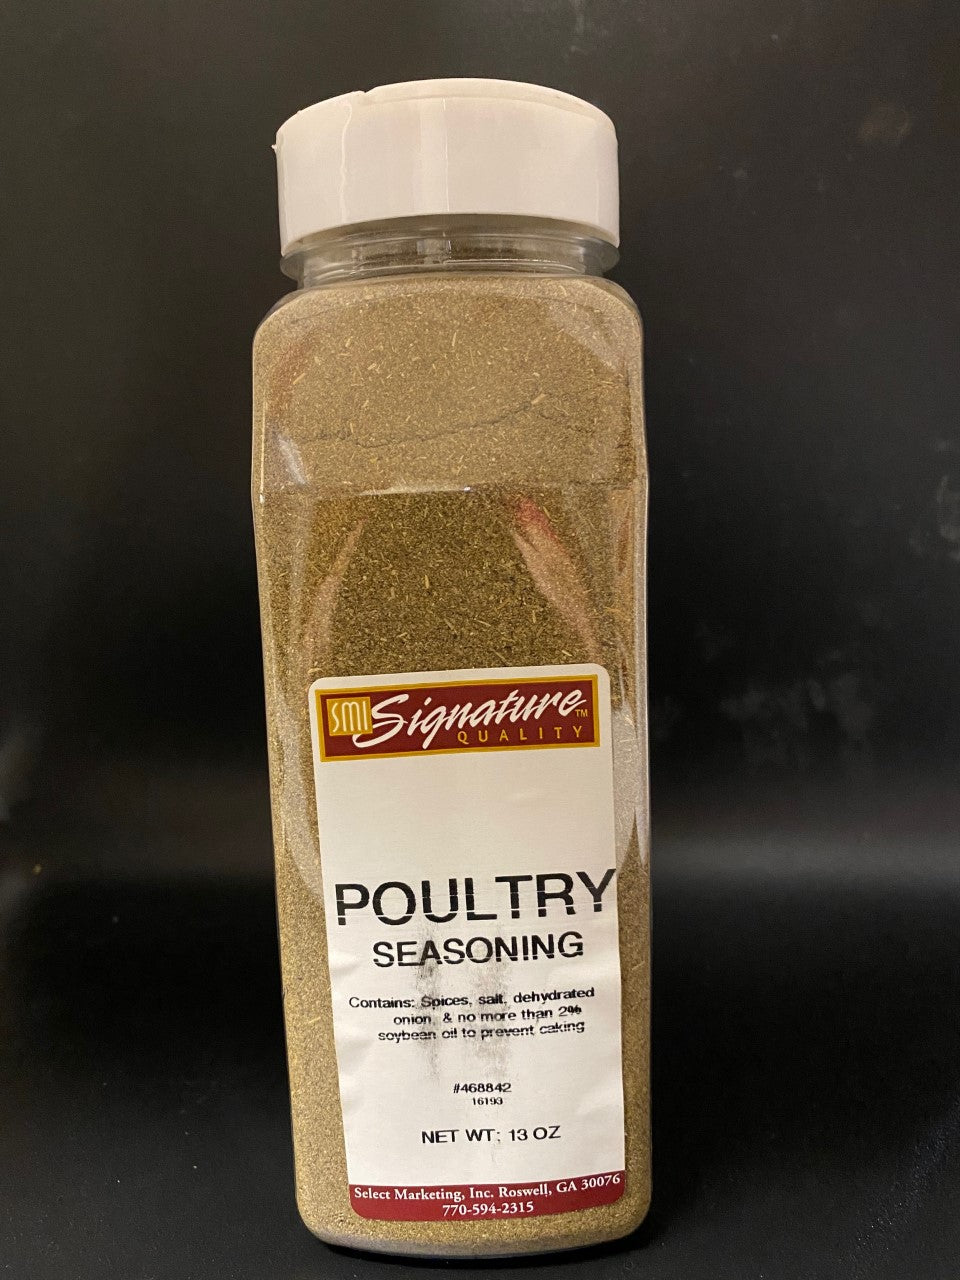 Signature Quality Poultry Seasoning 15 oz